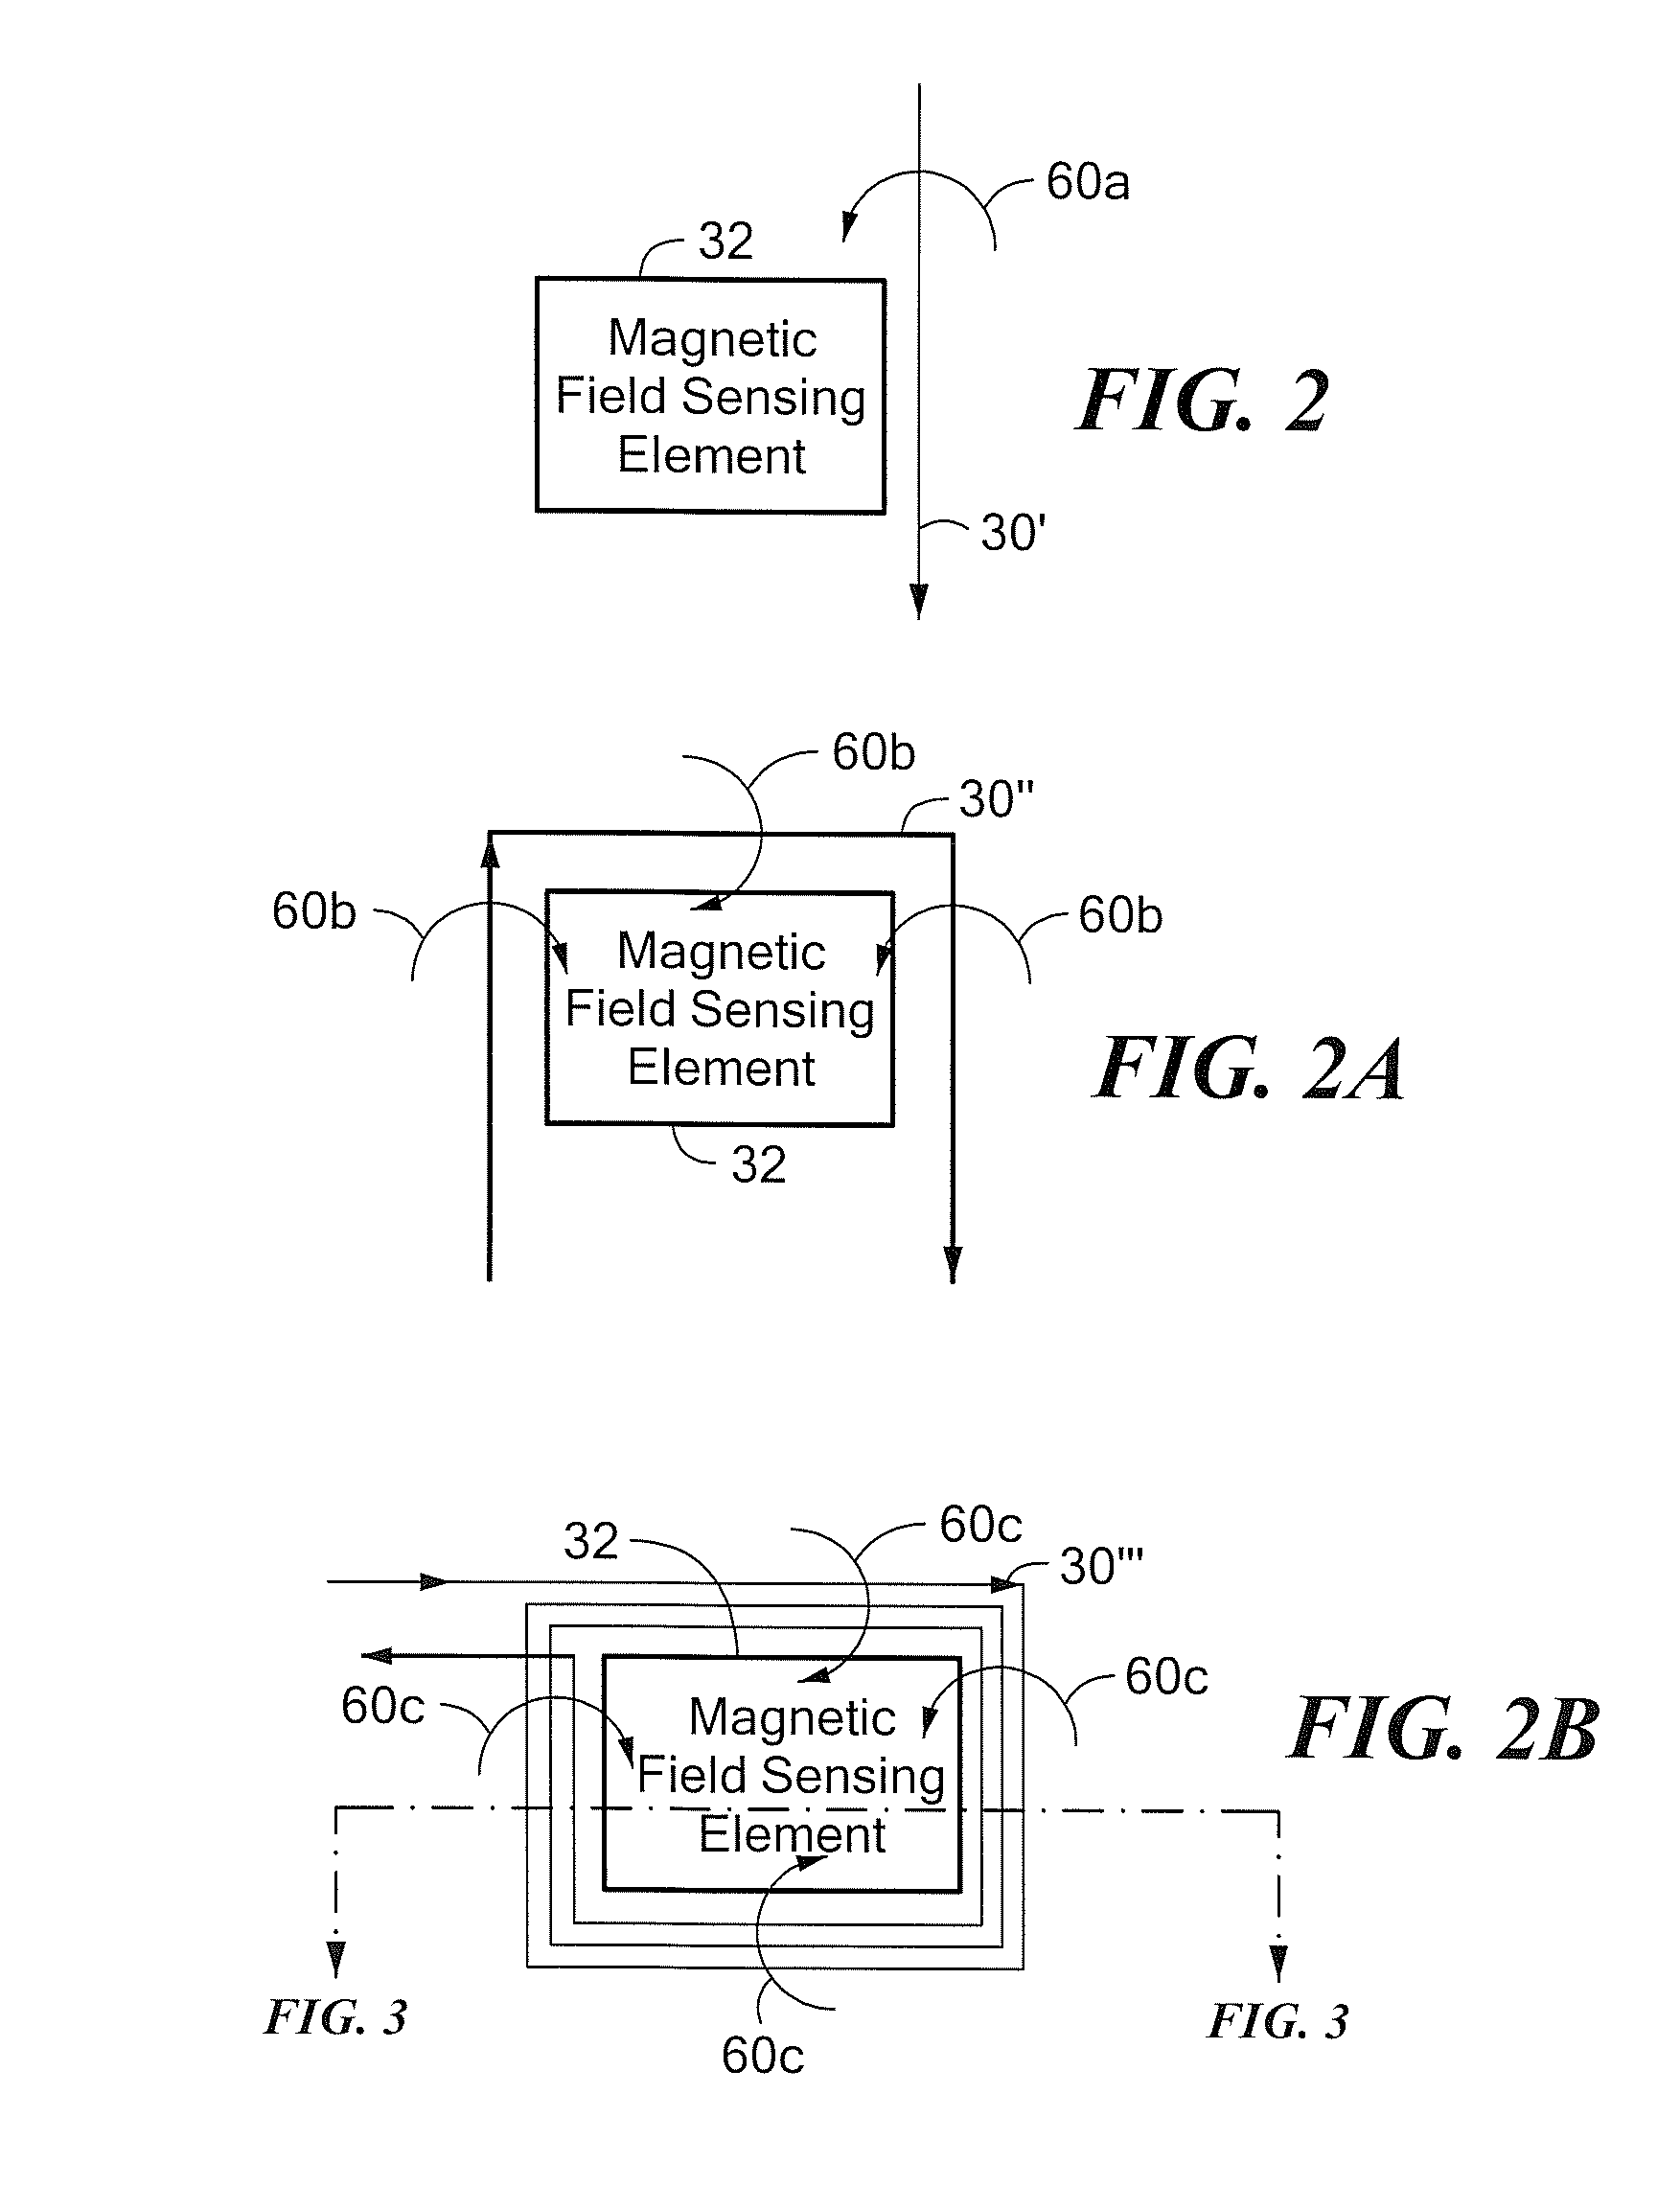 Circuits and Methods for Generating a Self-Test of a Magnetic Field Sensor